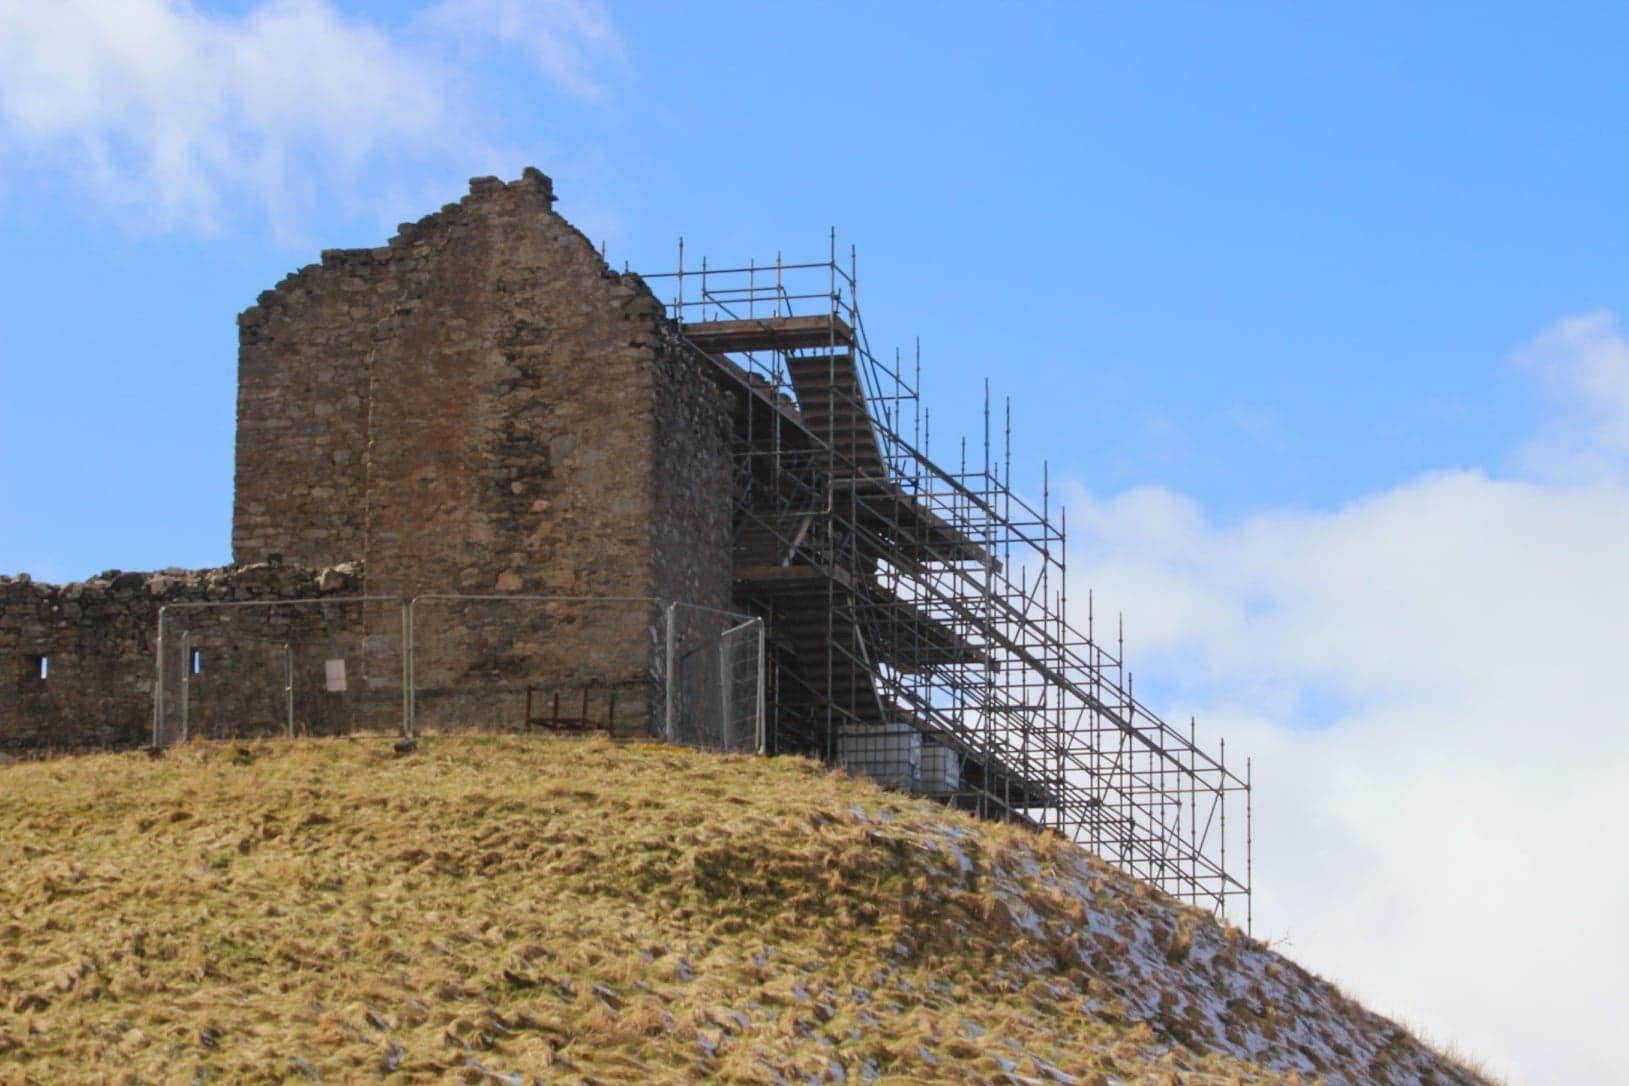 Scaffolding goes up at Ruthven Barracks